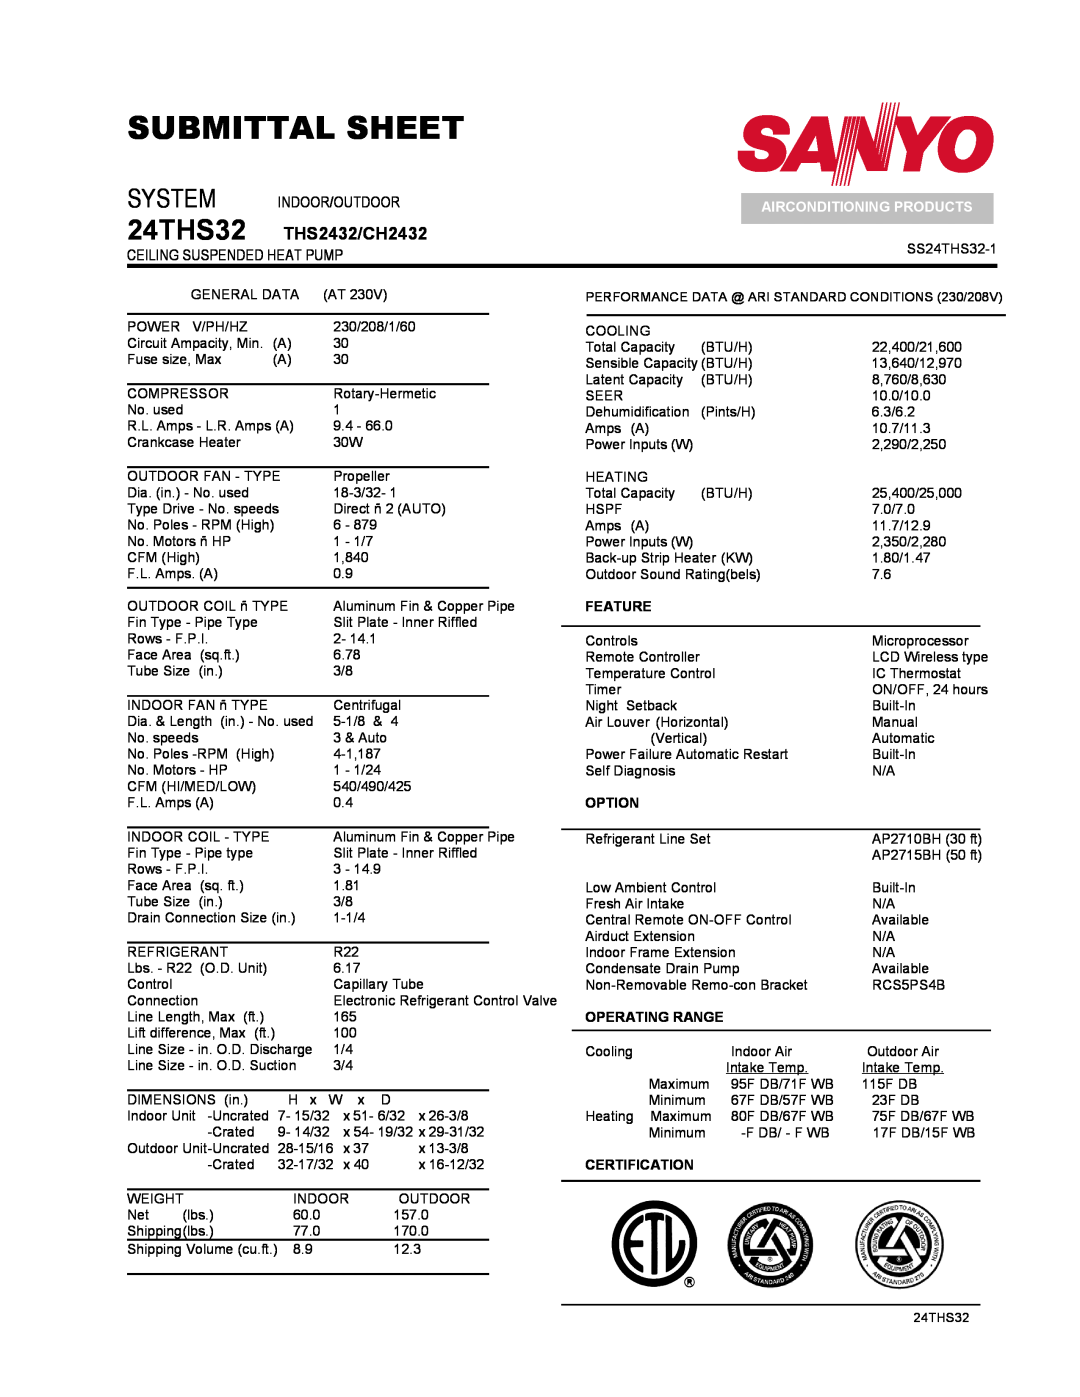 Sanyo 24THS32 dimensions Submittal Sheet, System, THS2432/CH2432, Indoor/Outdoor, Airconditioning Products, Feature 